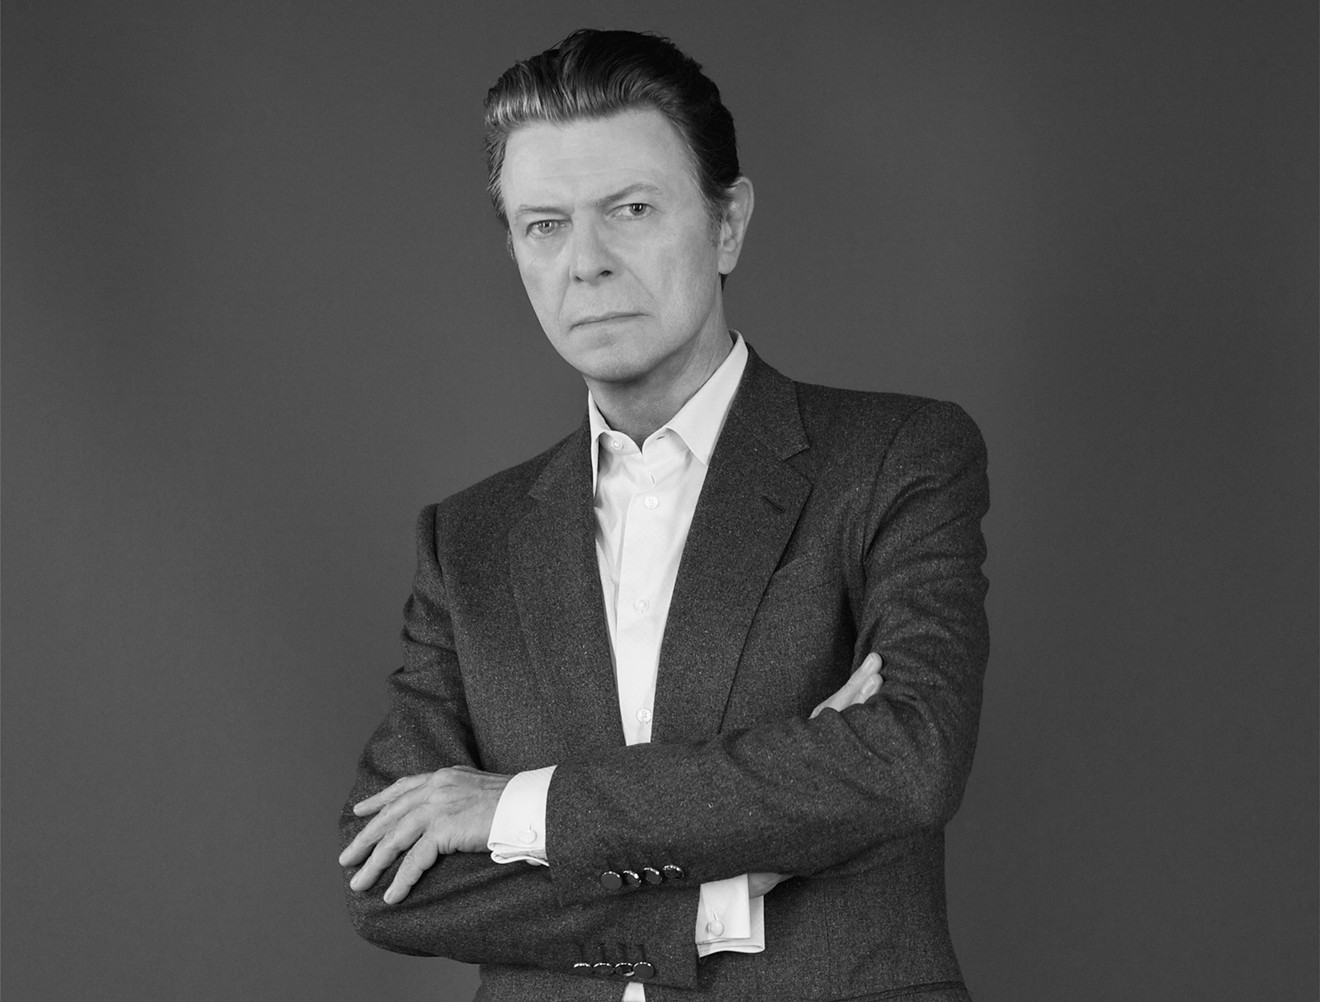 The late, great David Bowie.